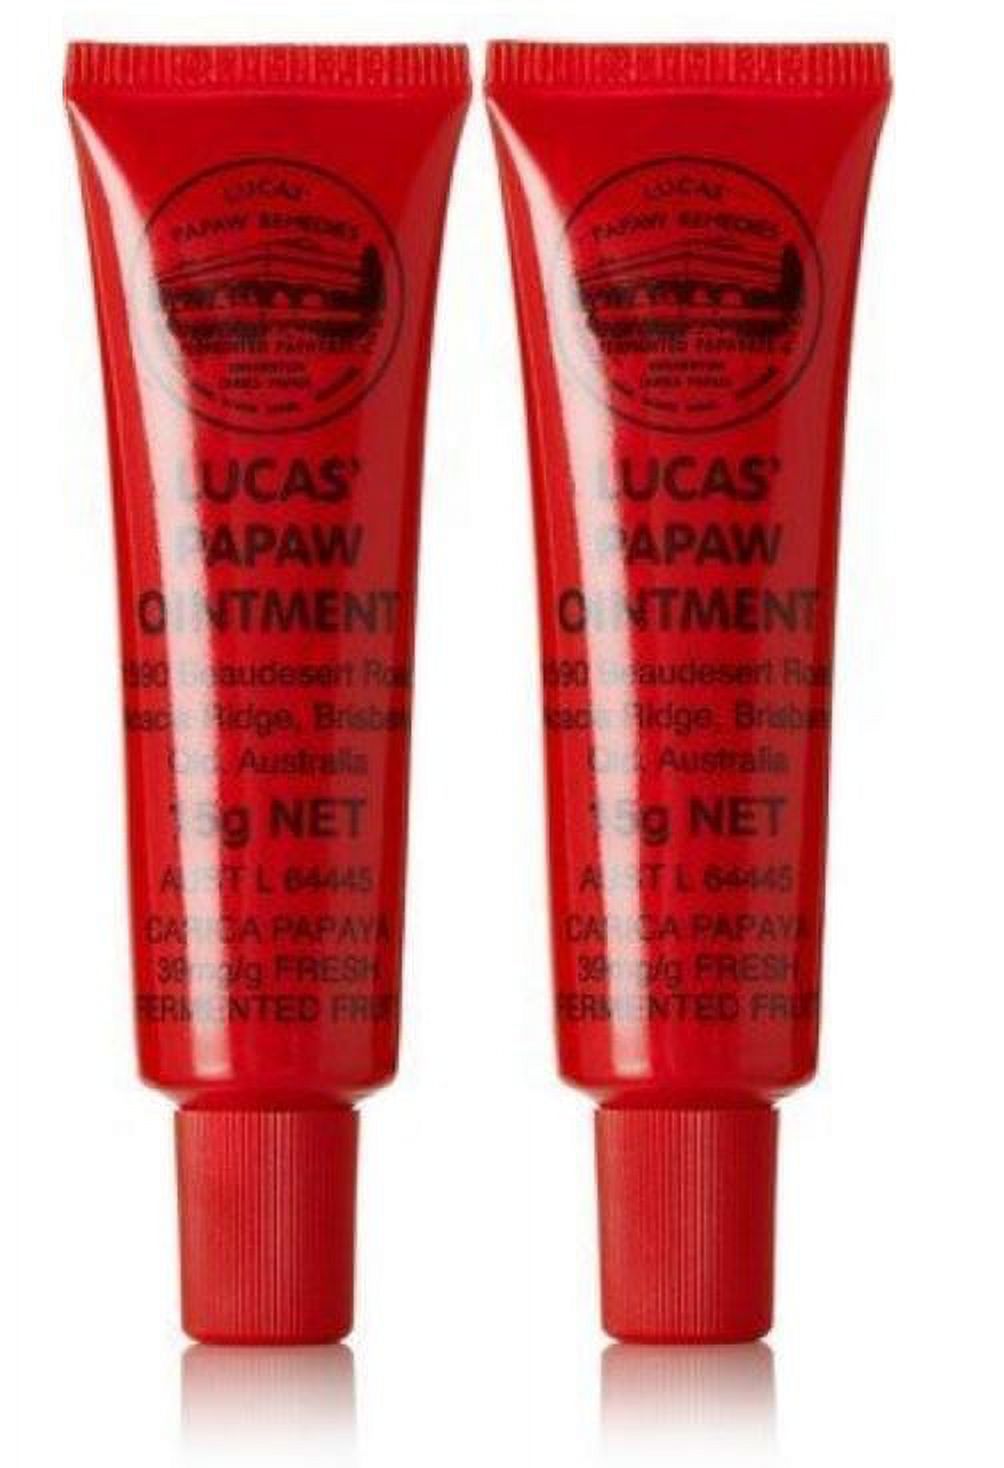 Two Tubes of Lucas Papaw Ointment 15g with Lip Applicator